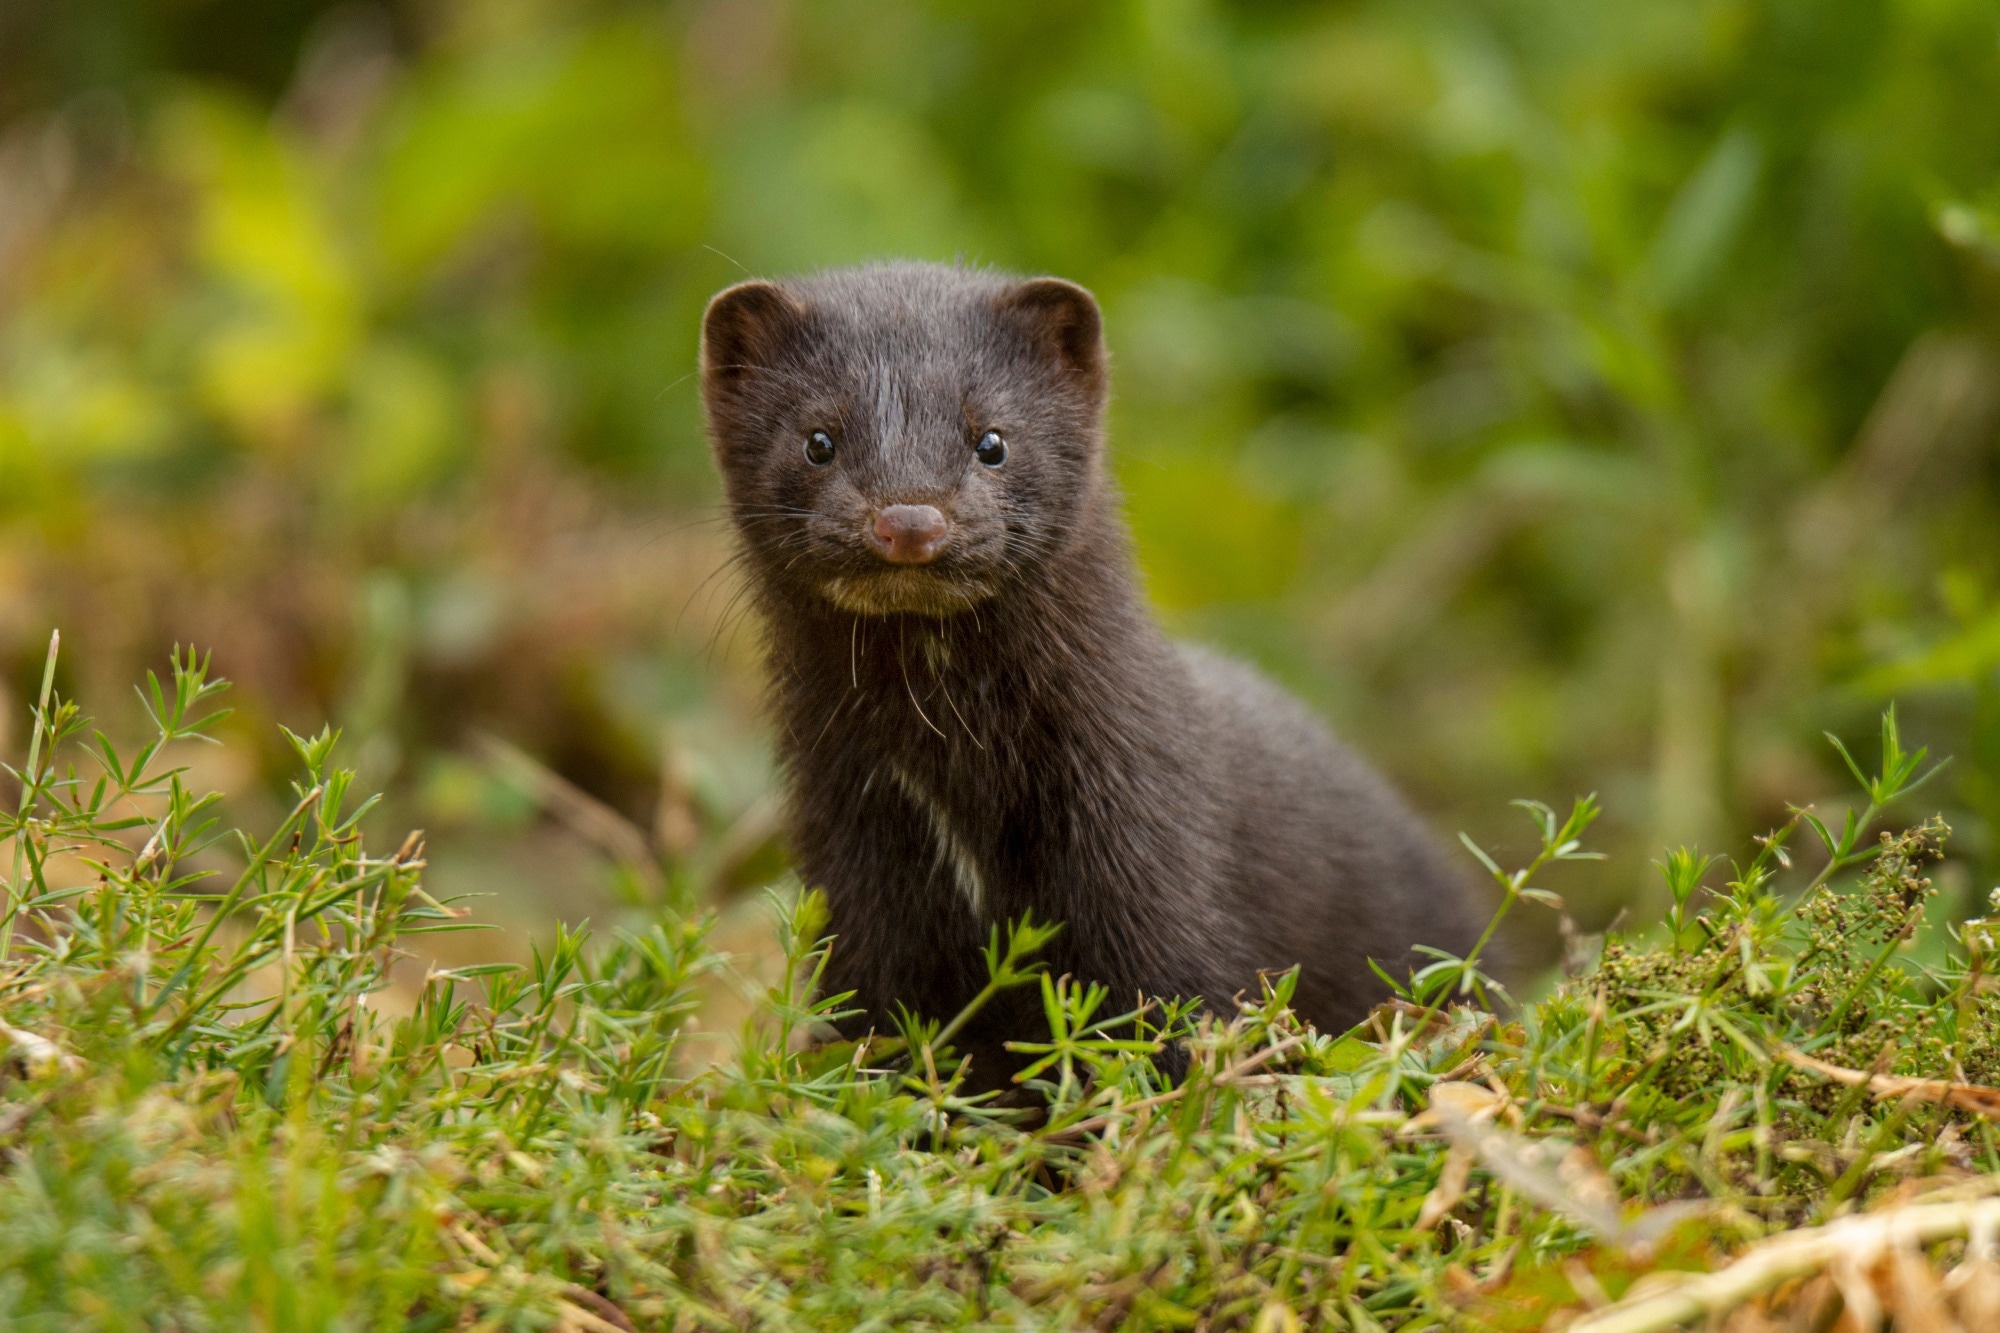 Study: Cryptic SARS-CoV-2 lineage identified on two mink farms as a possible result of long-term undetected circulation in an unknown animal reservoir, Poland, November 2022 to January 2023. Image Credit: Aninspiration/Shutterstock.com